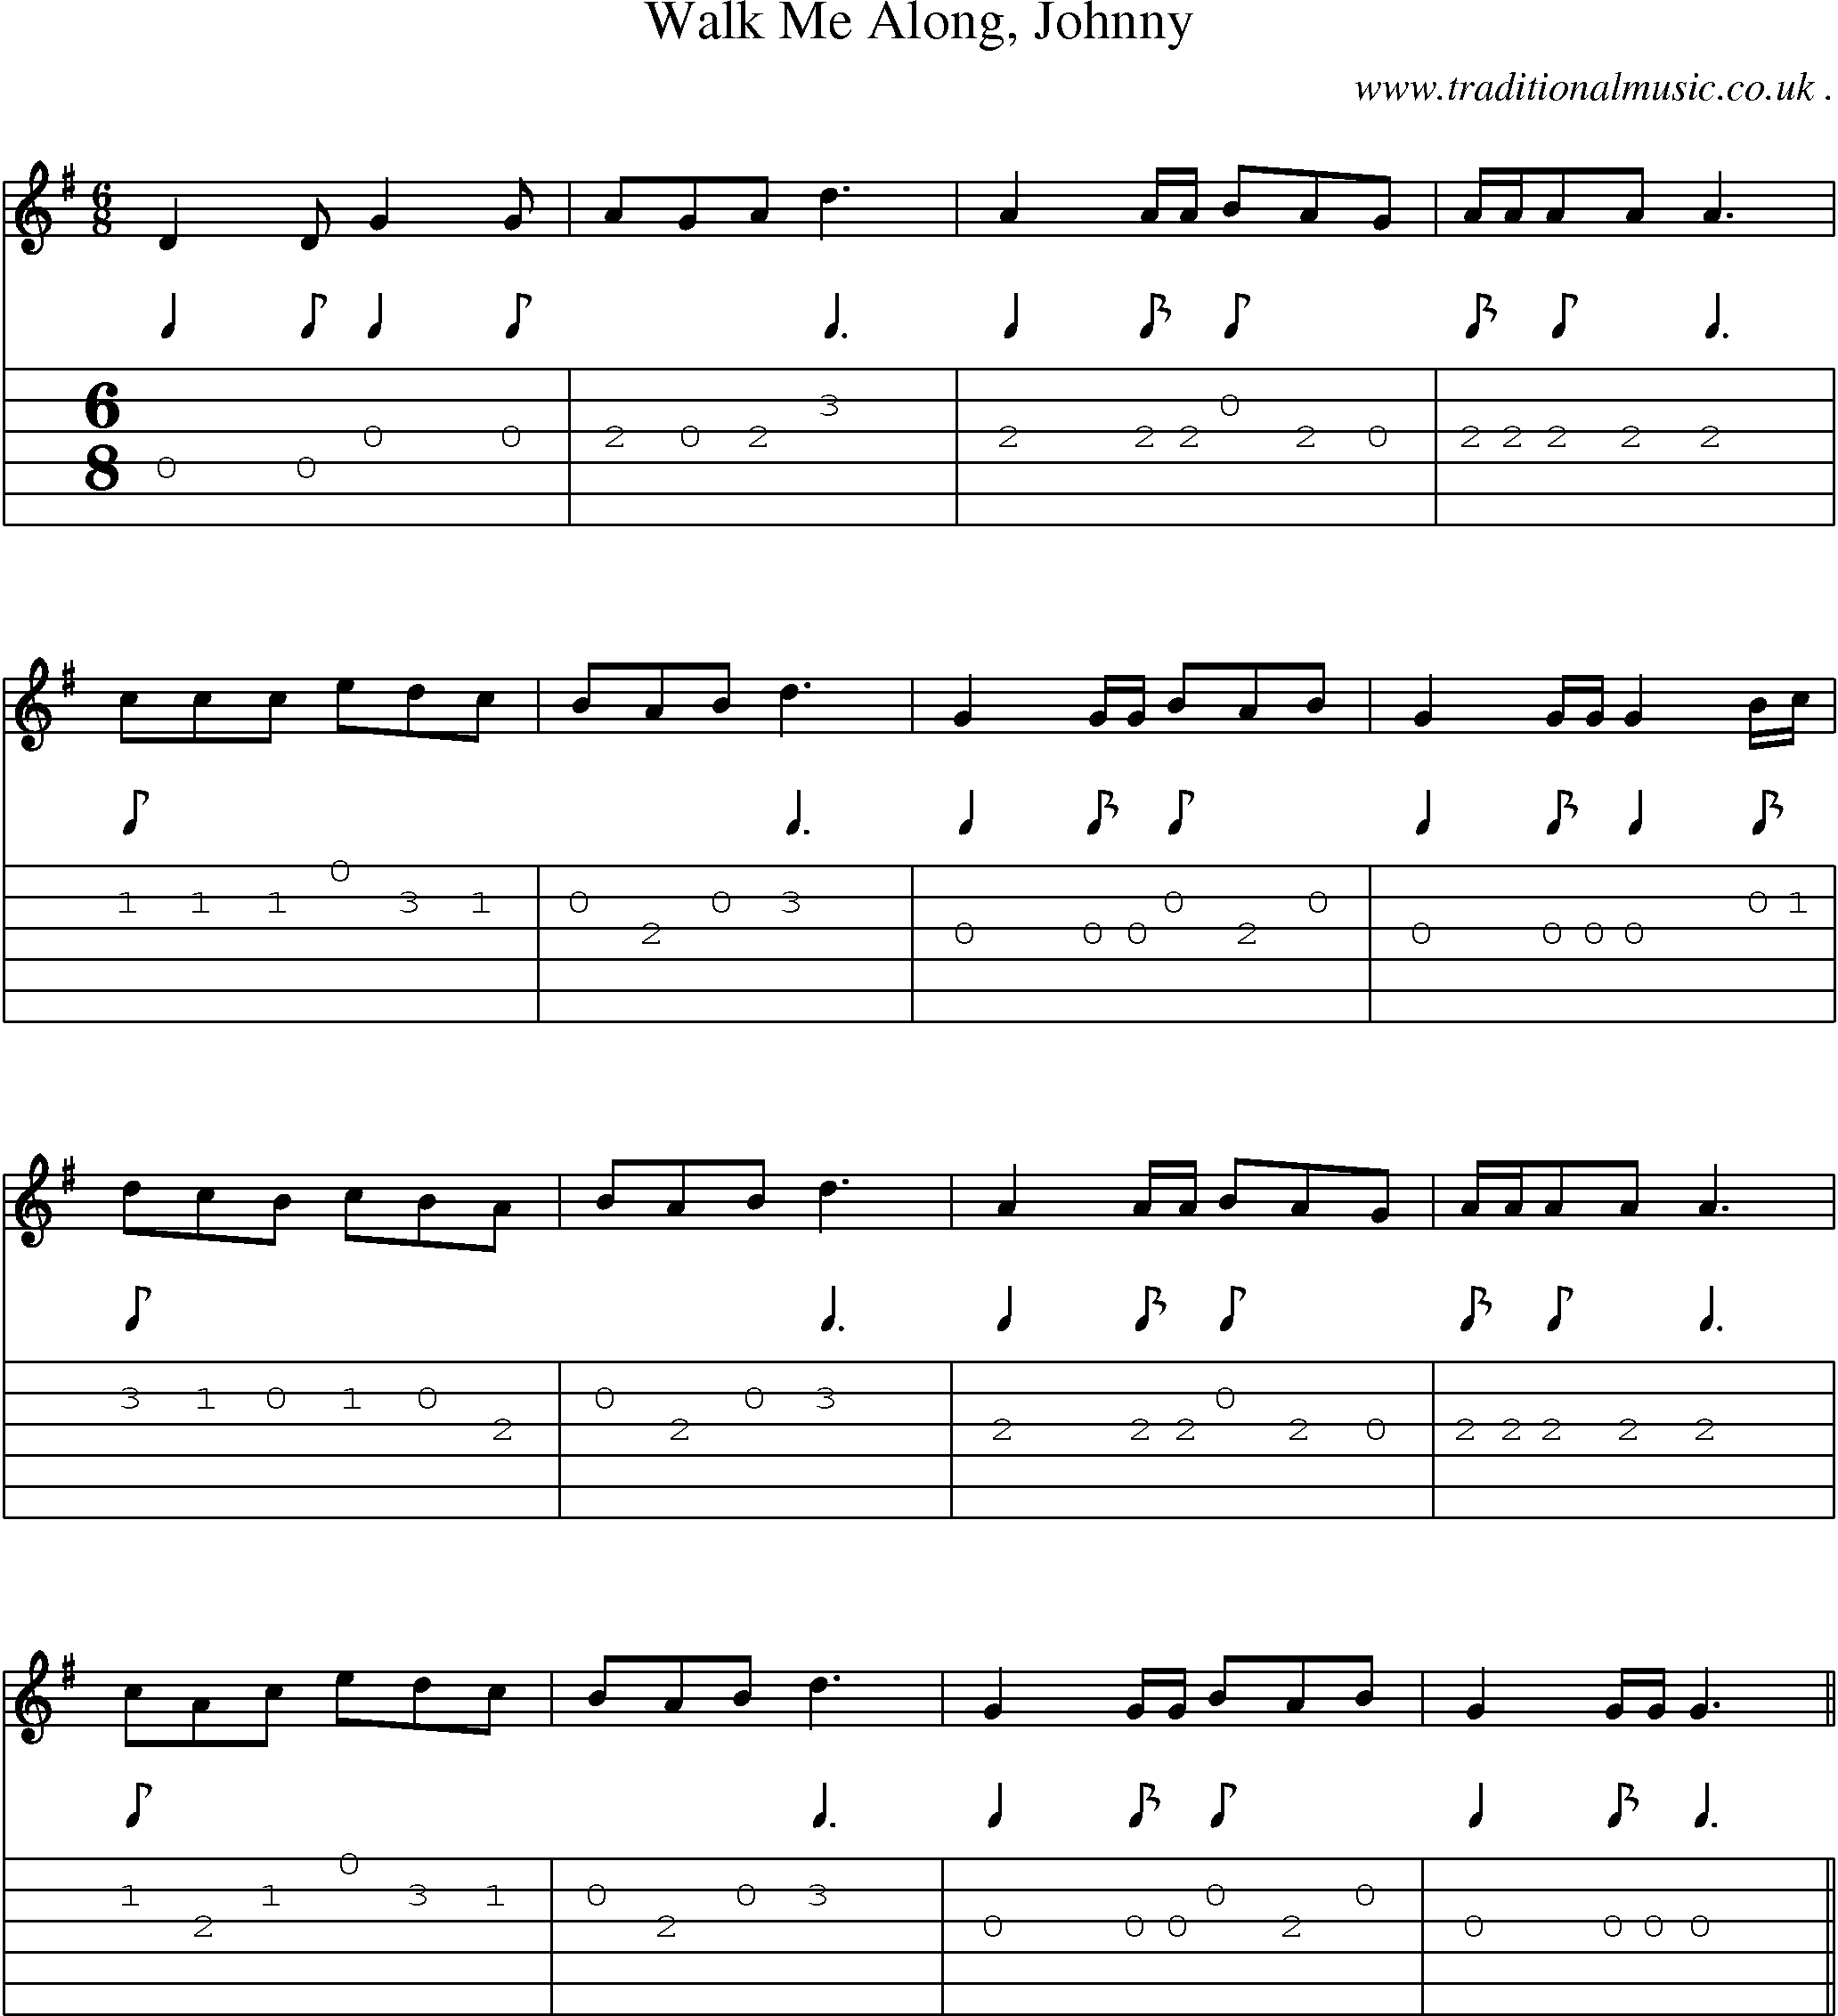 Sheet-Music and Guitar Tabs for Walk Me Along Johnny